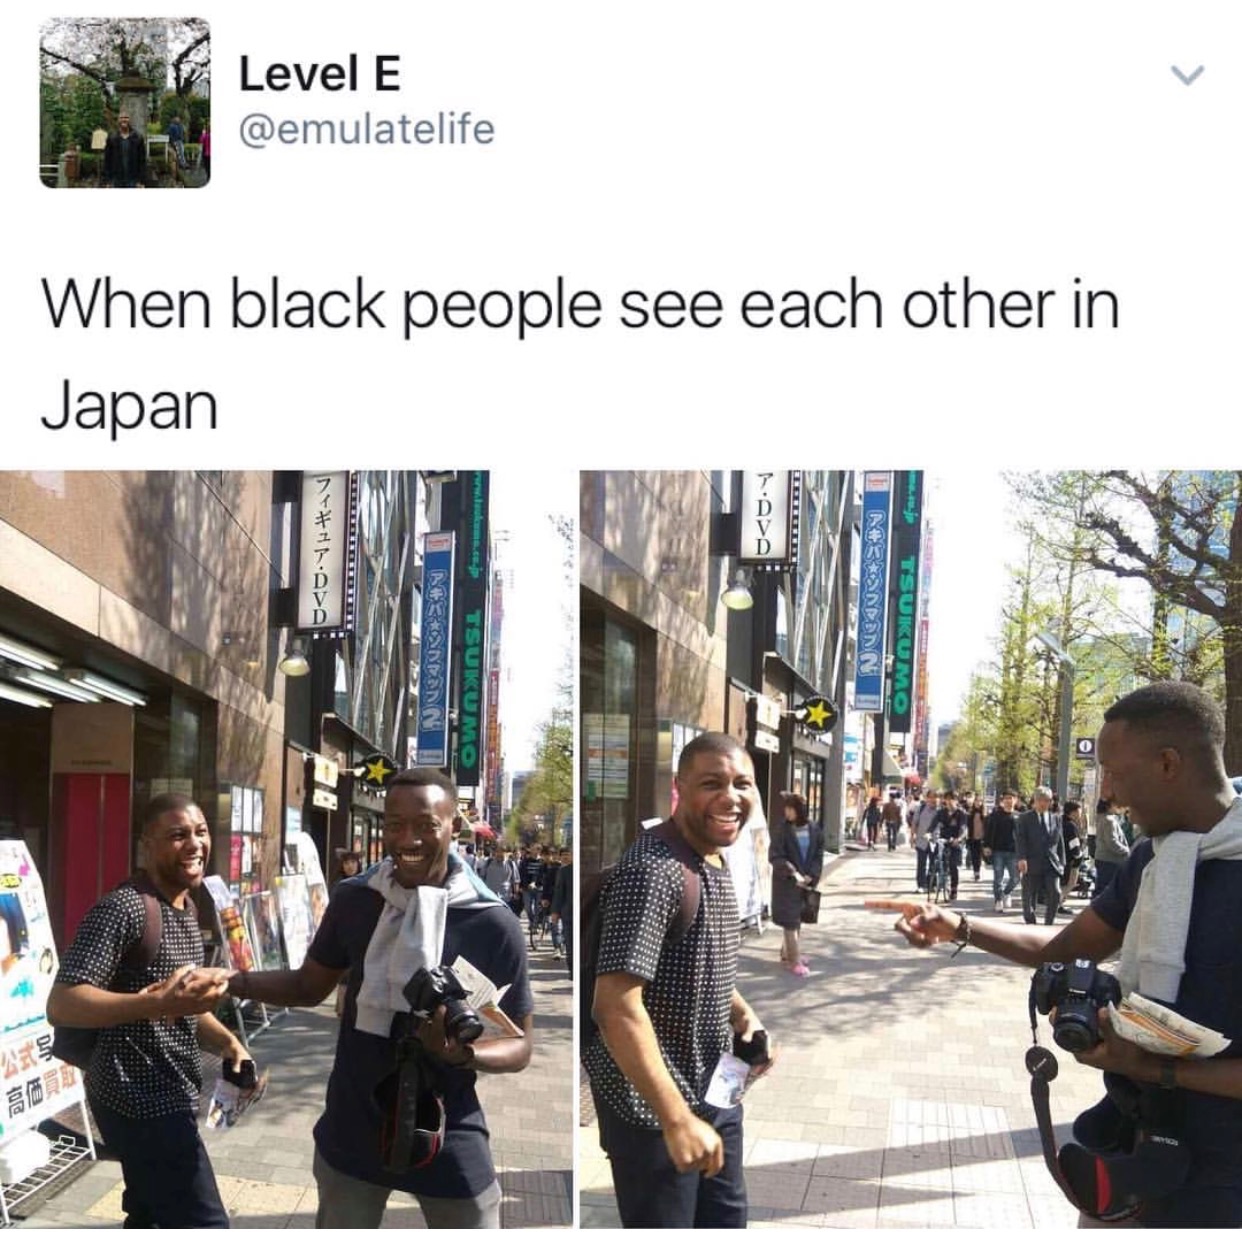 black people in japan meme - Level E When black people see each other in Japan Ielle cams.co.P Ridini .Jp Tsukumo Tsukumot